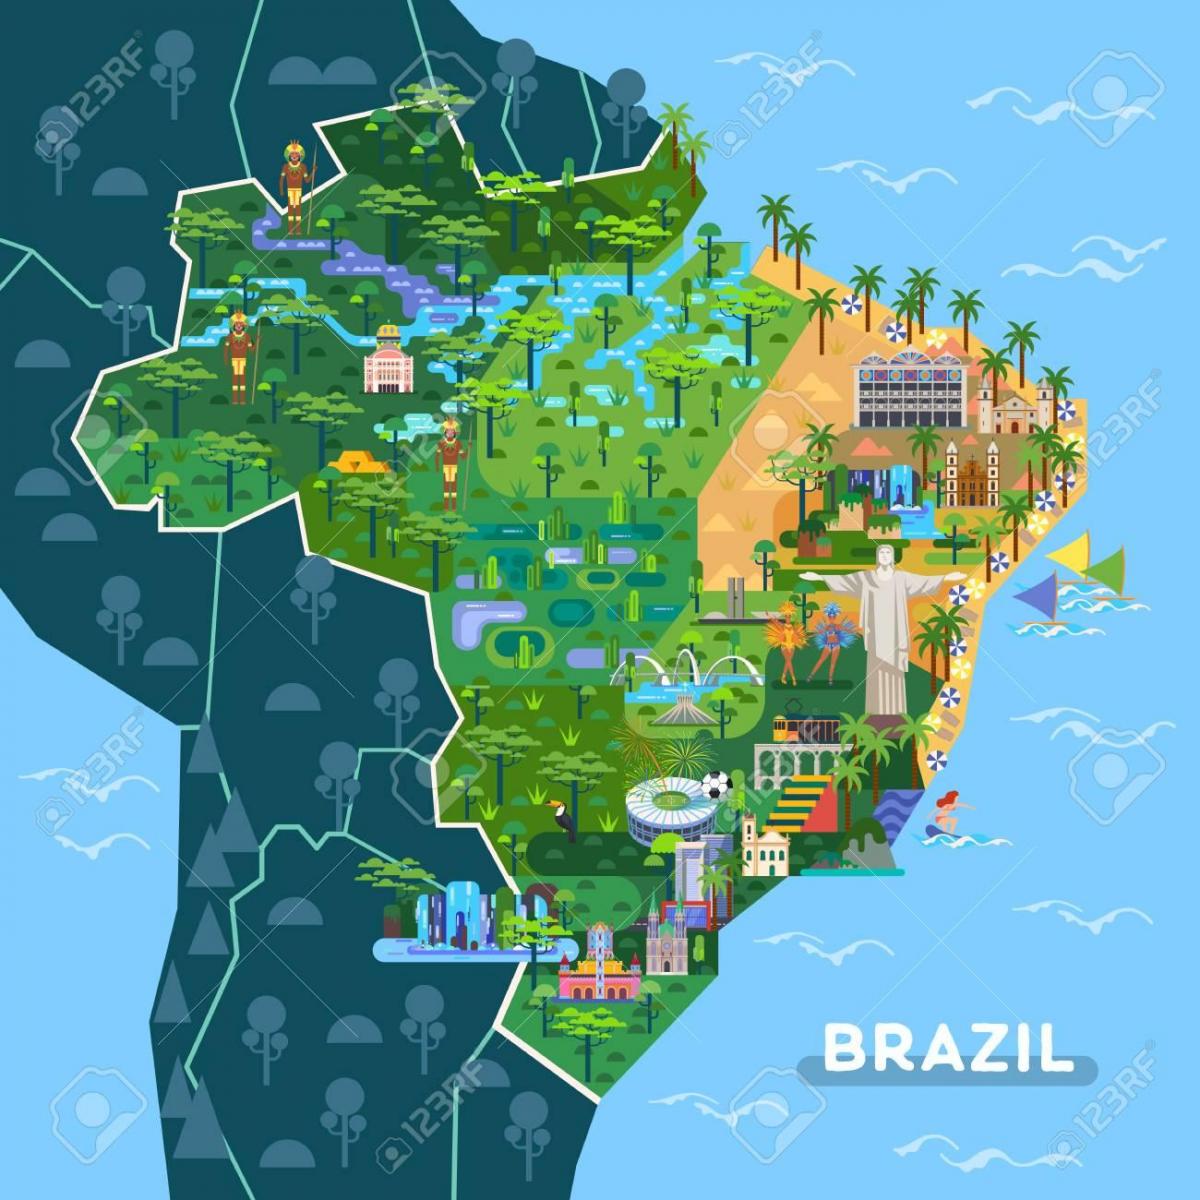 Brazil tourist attractions map